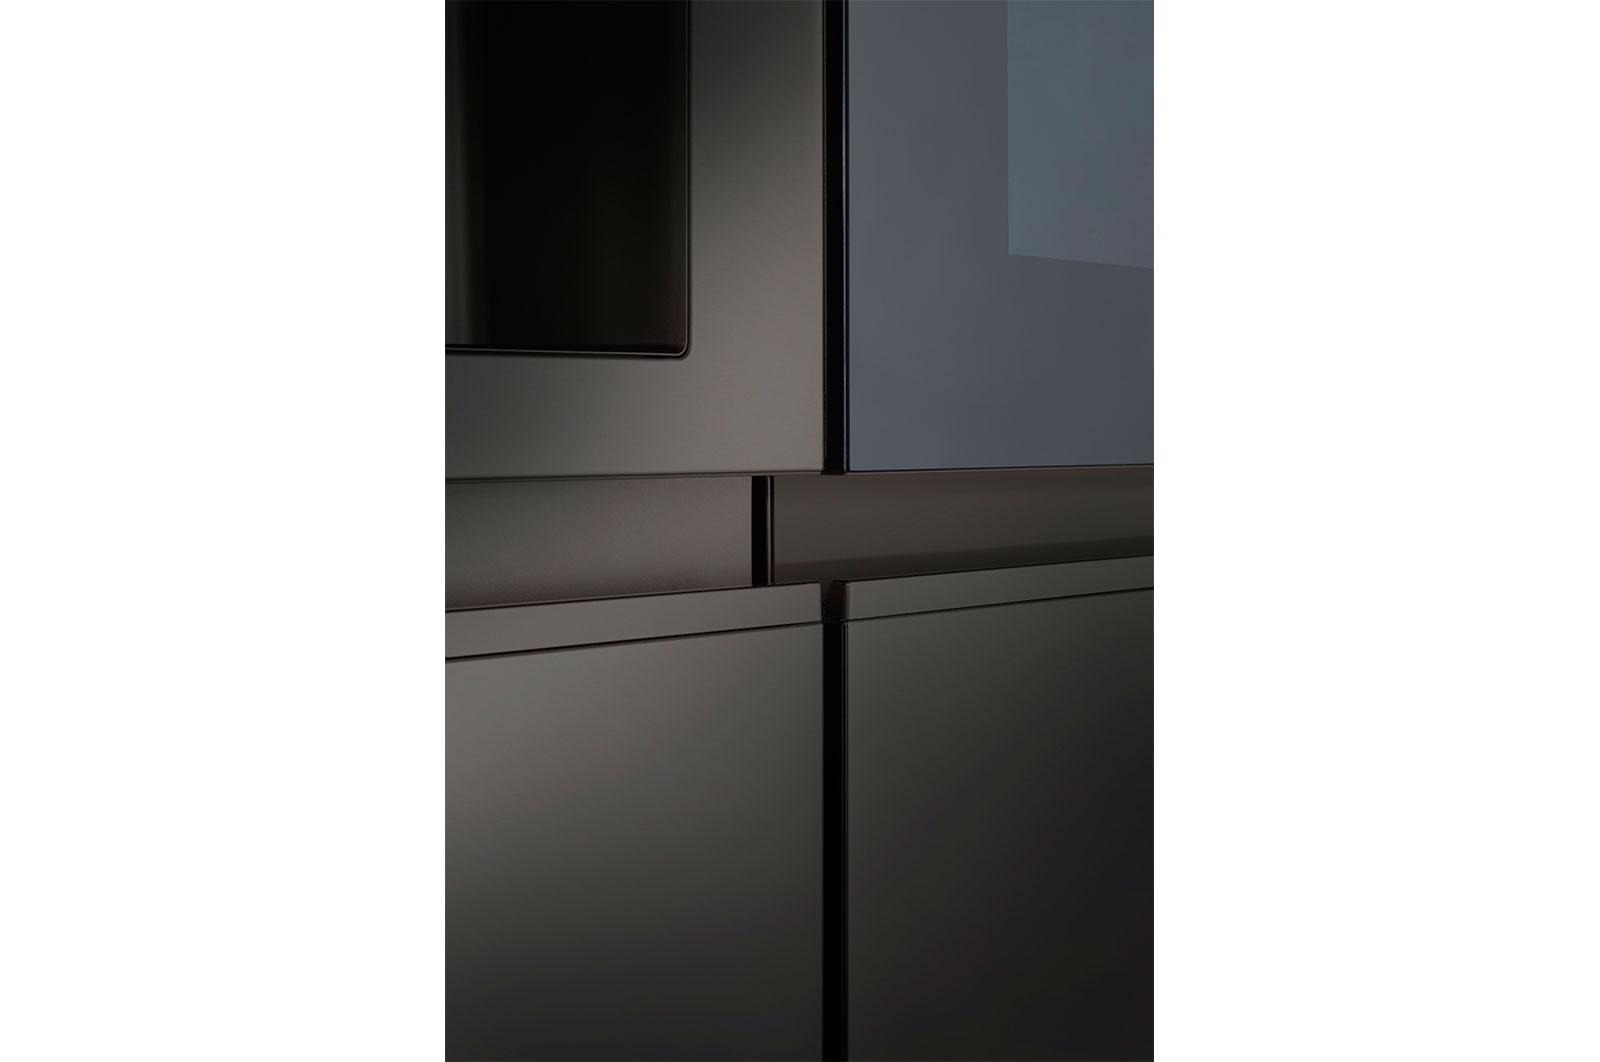 23 cu. Ft. Side-By-Side Counter-Depth InstaView® Refrigerator with Craft Ice™